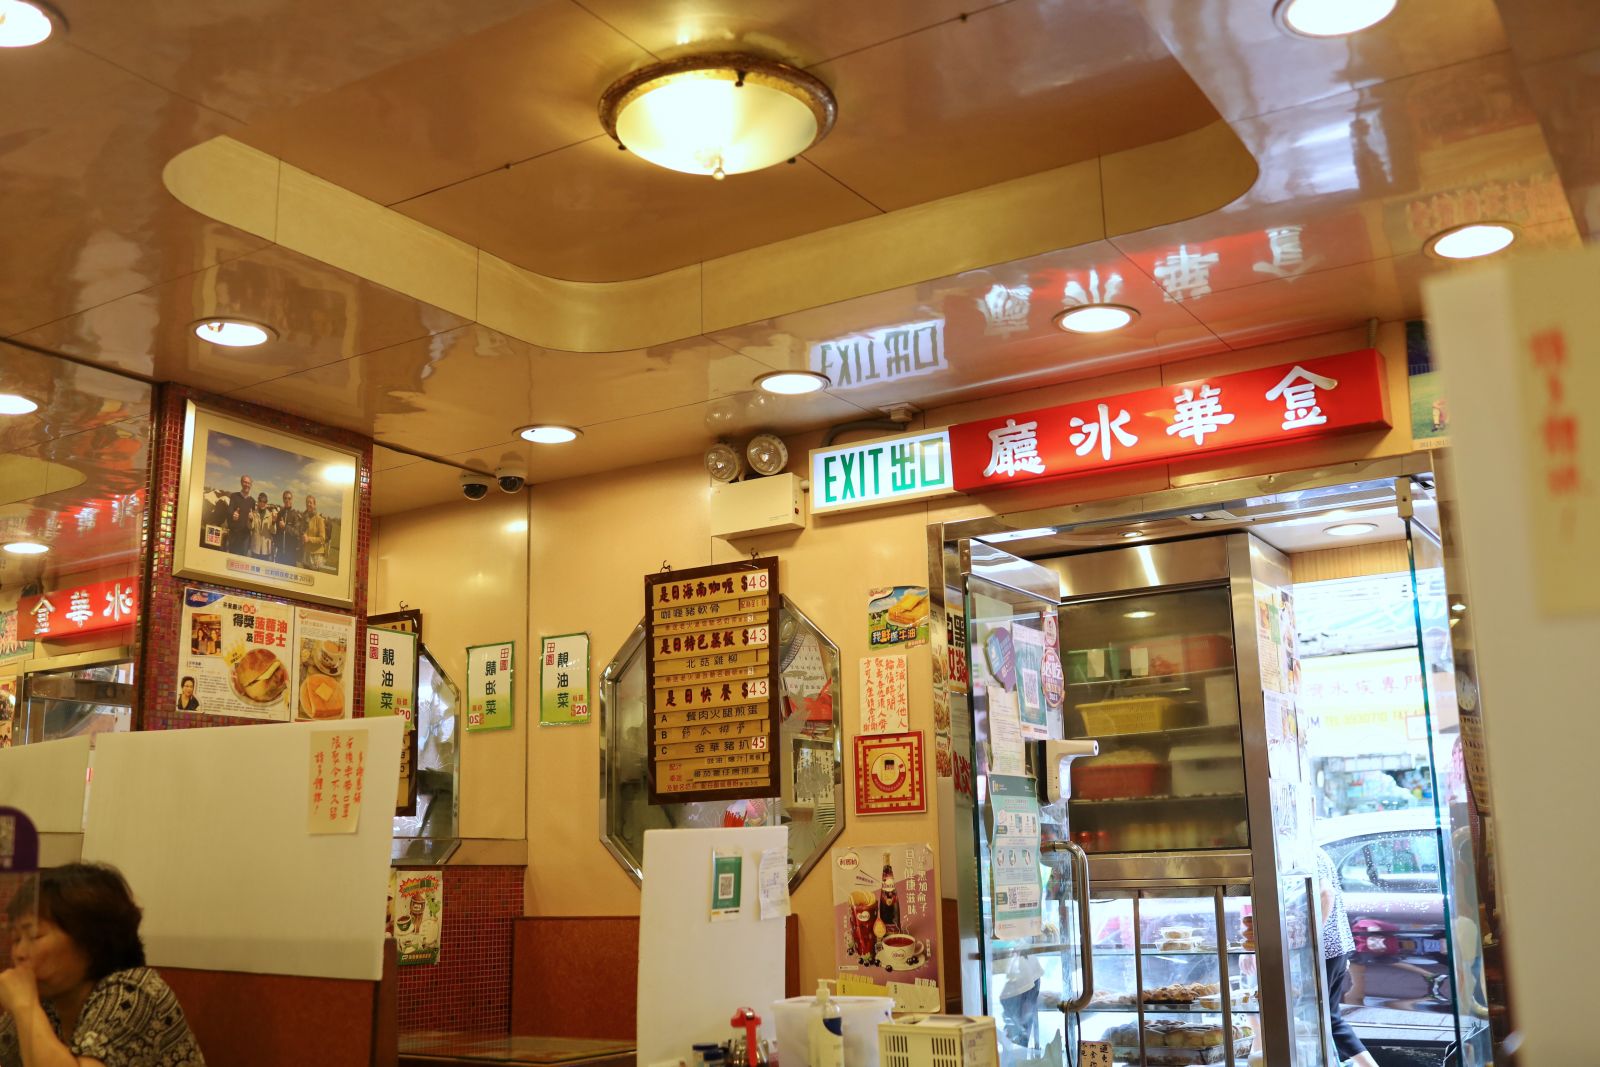 The typical old style of Hong Kong Cha Chaan Teng